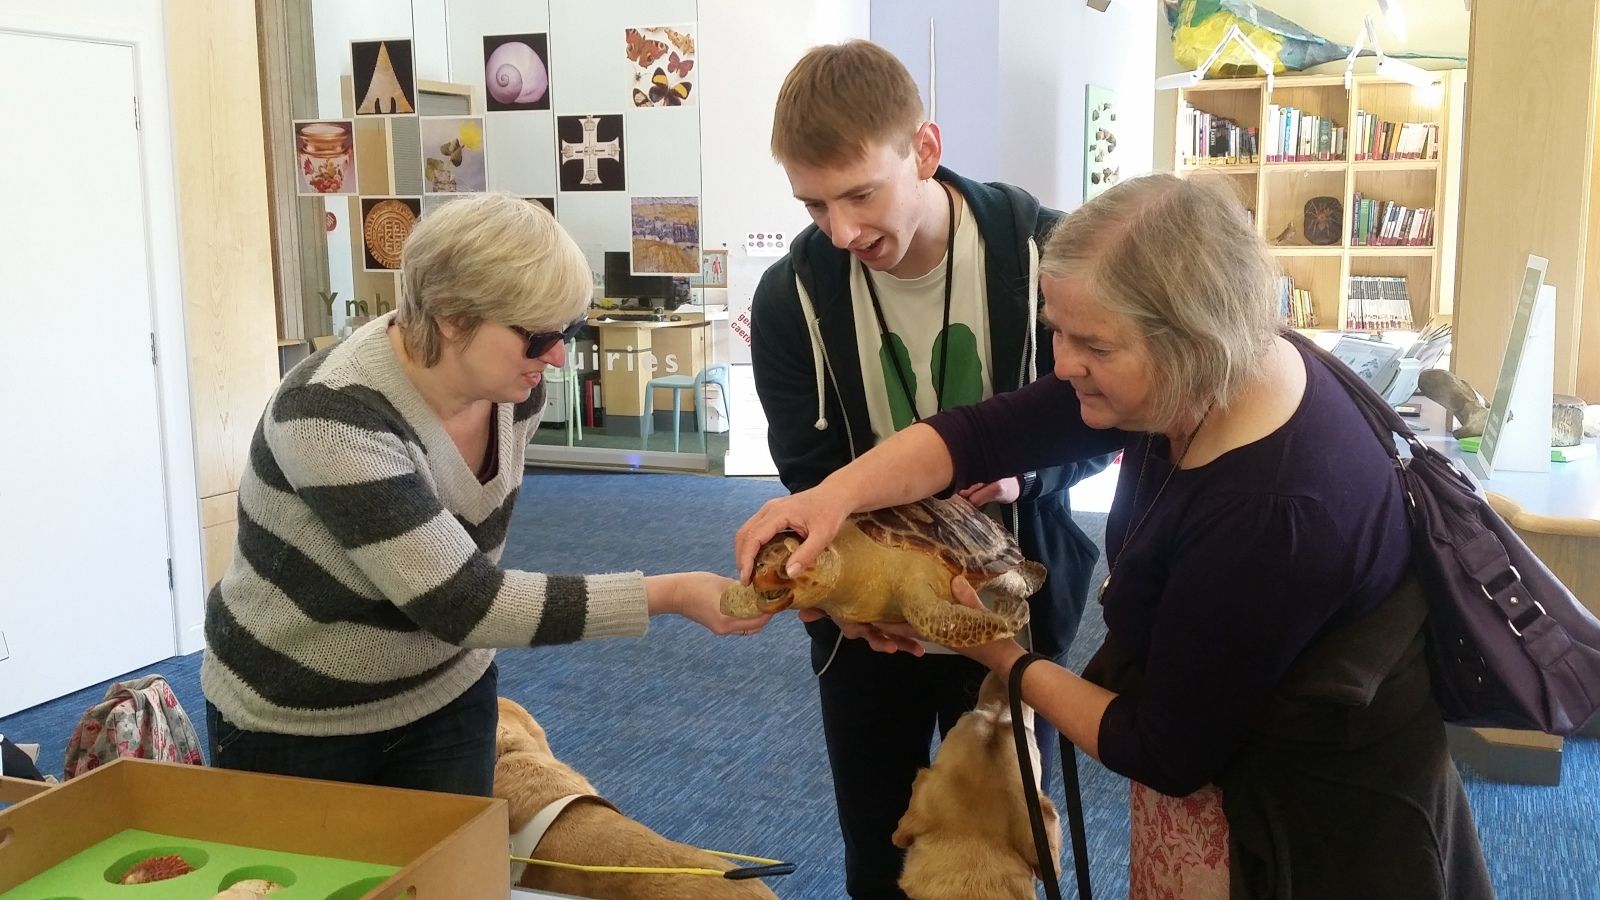 Photograph of Audio Description Tour Training Session, showing a museum staff member and participants touching a stuffed turtle